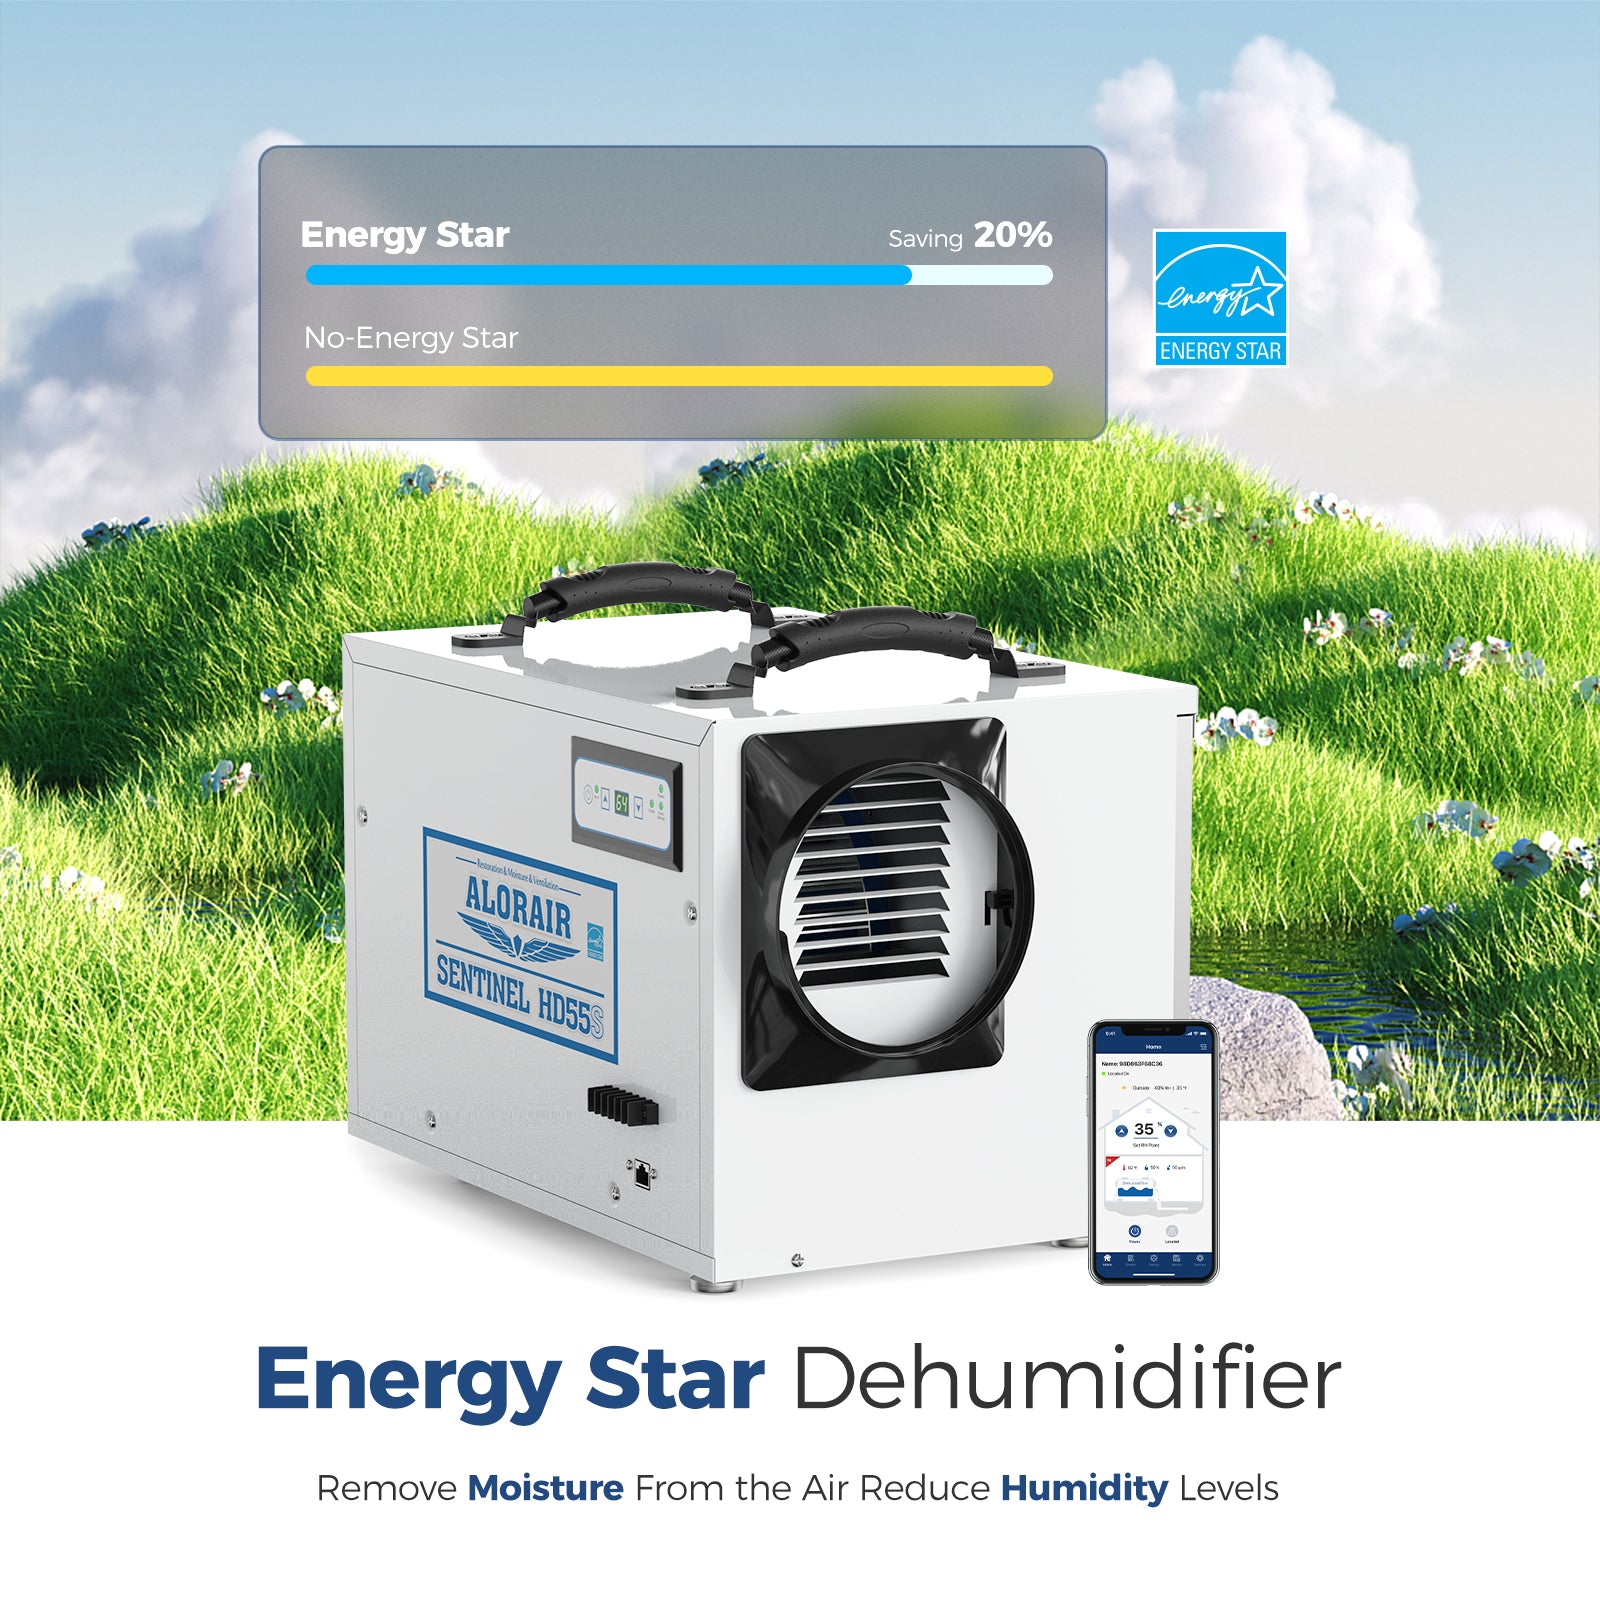 AlorAir® App Controlled Dehumidifier Removal 120PPD| Sentinel HD55S White WIFI | Size for 1300 sq.ft